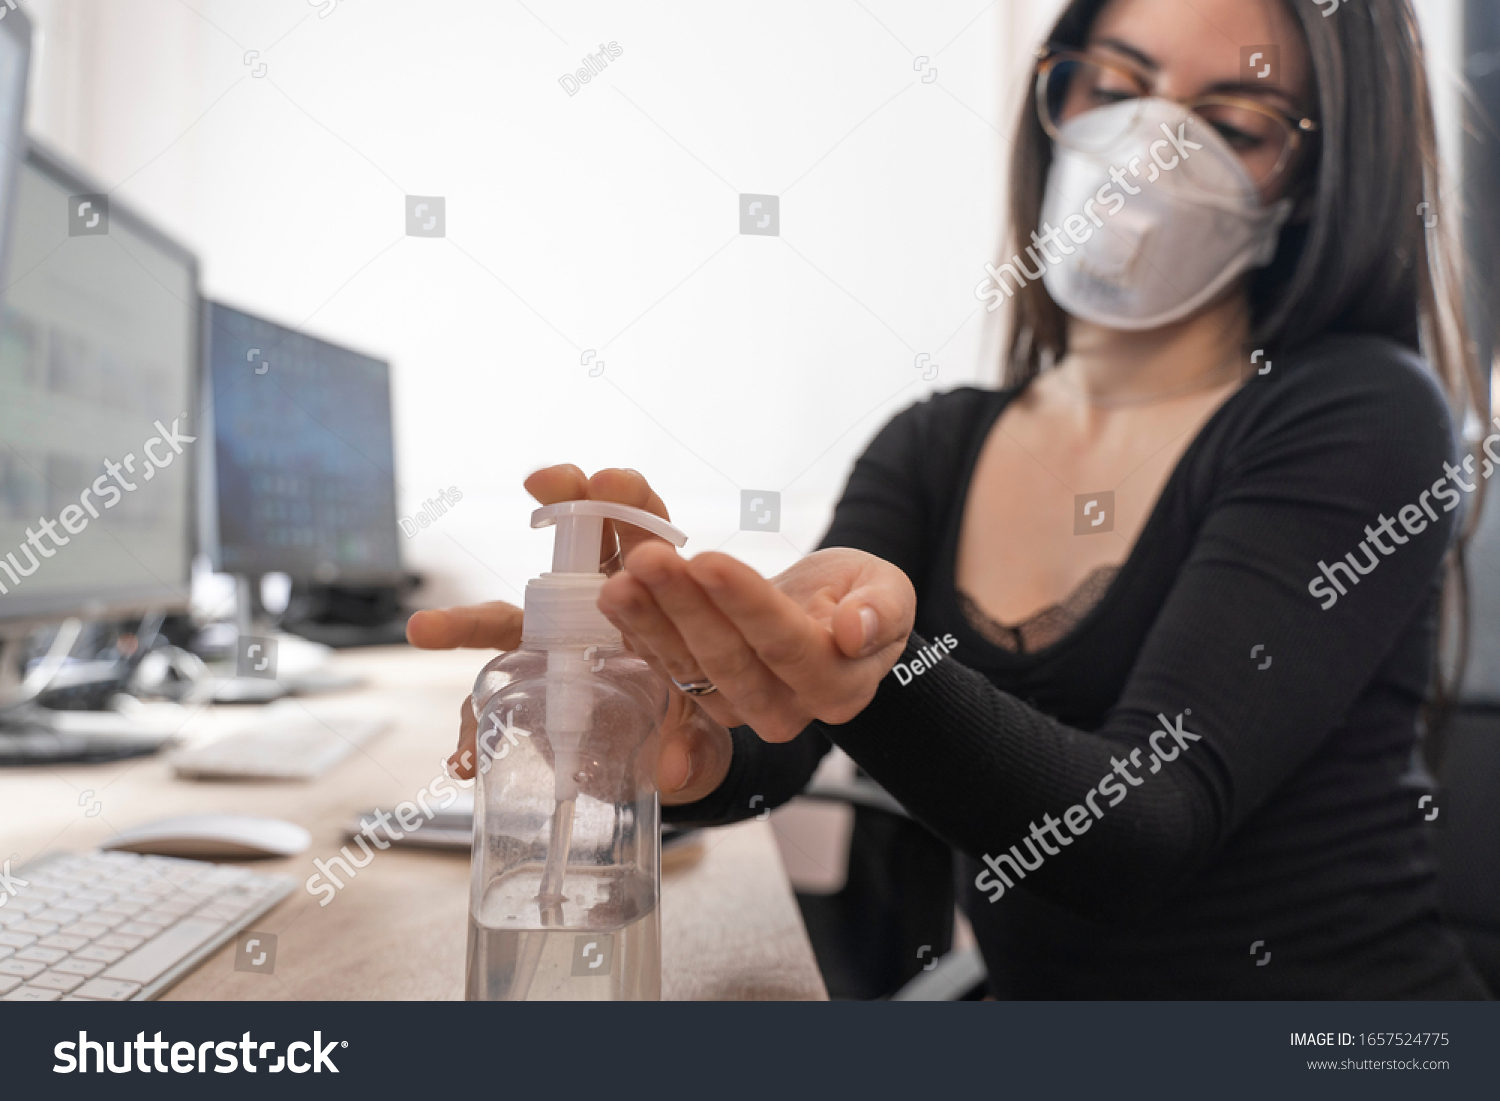 Corona Virus. Woman cleaning her hands at the office. Sick with mask for corona virus. Workplace desk with computer. Woman spraying alcohol gel or antibacterial soap sanitizer. #1657524775